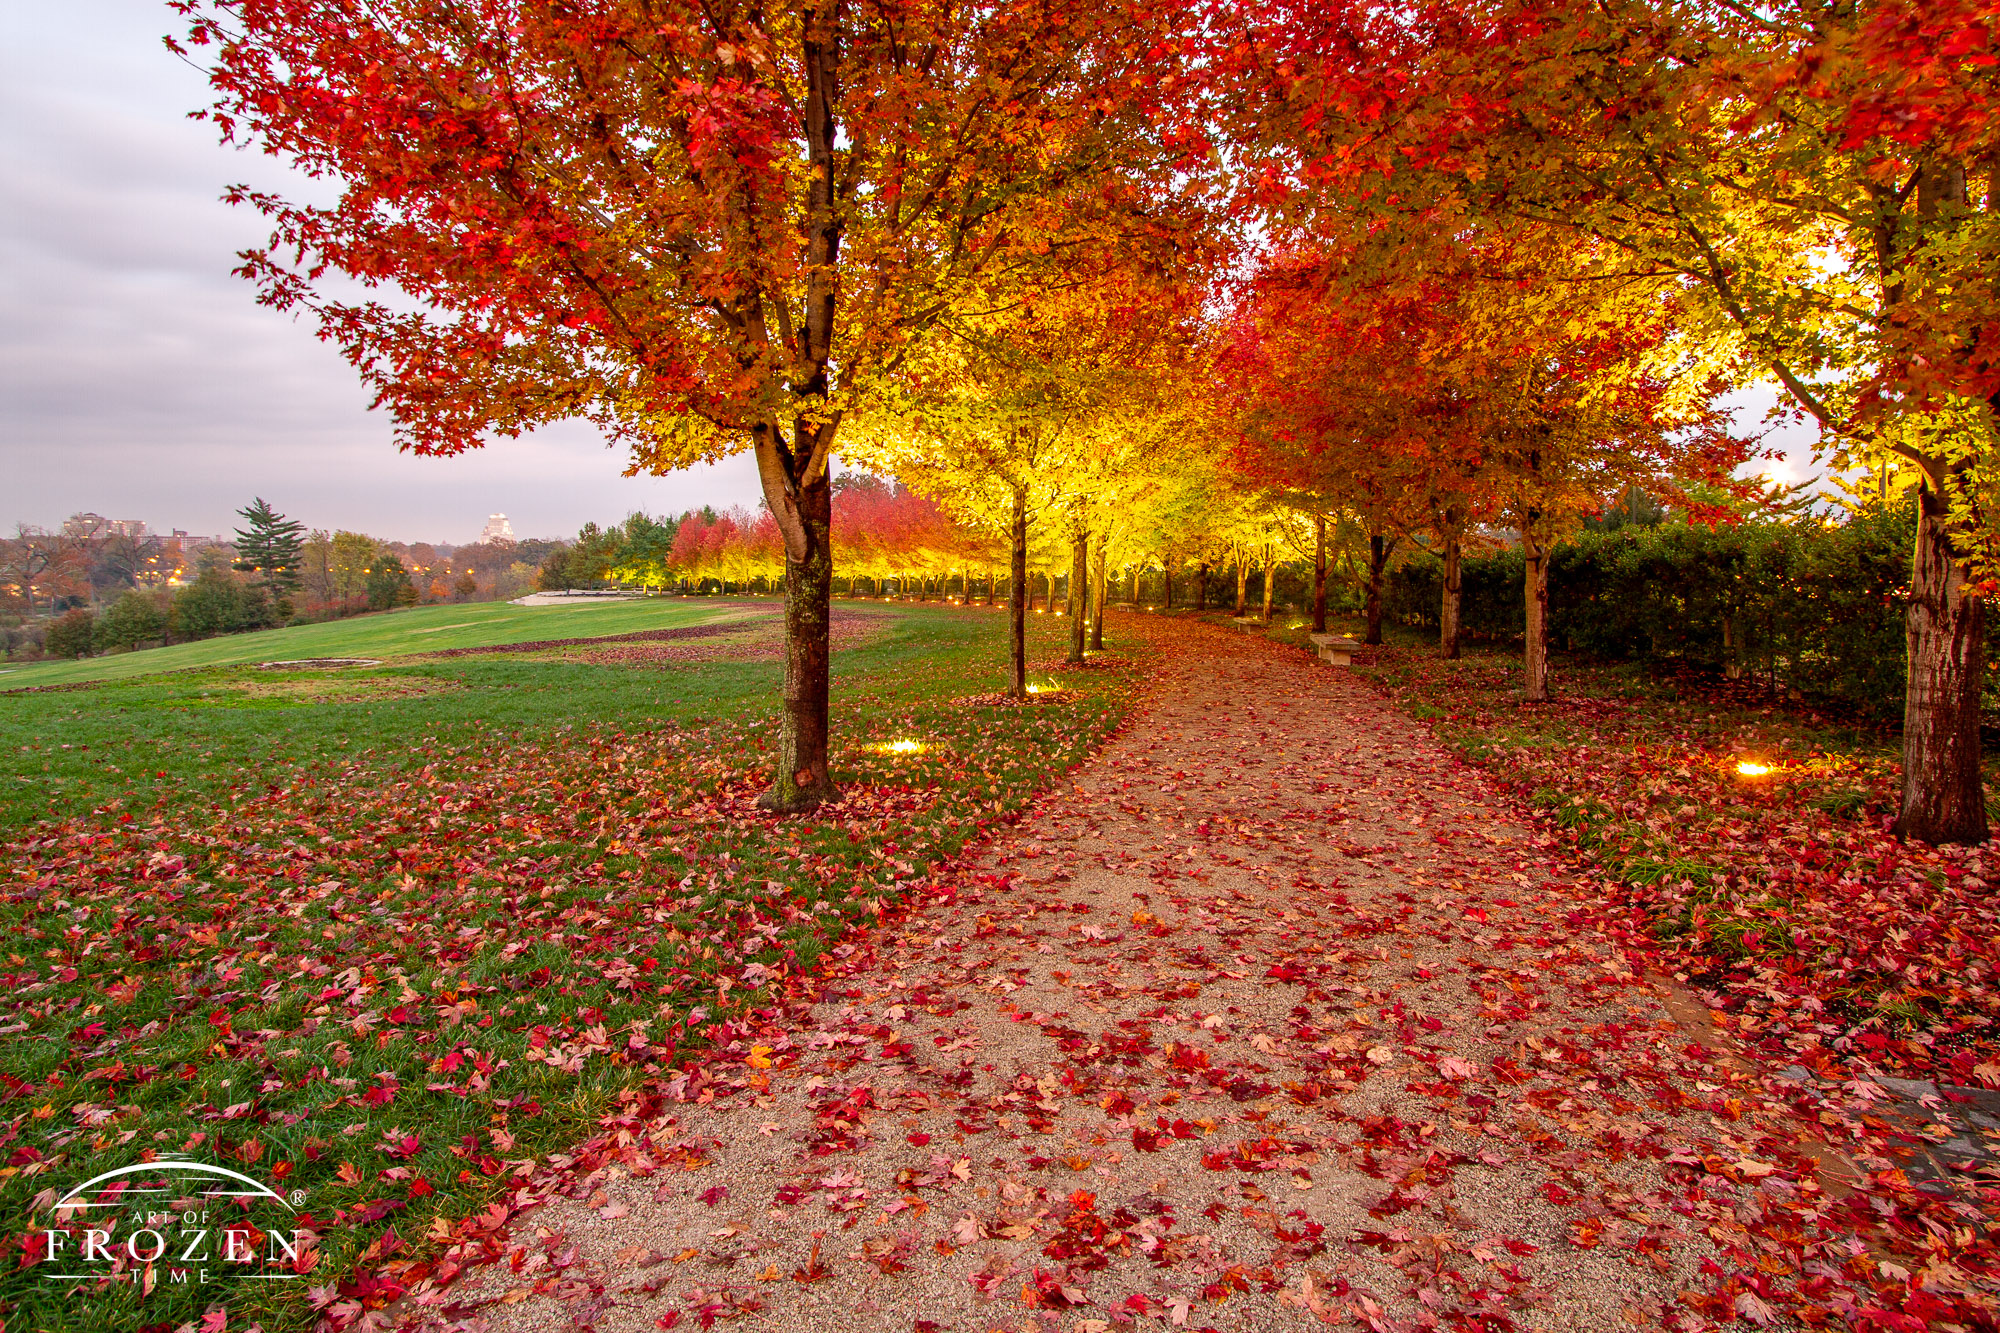 An autumn scene in Forest Park, St Louis, where the path curves under Maple trees showing bright red leave which are illuminated by up lights